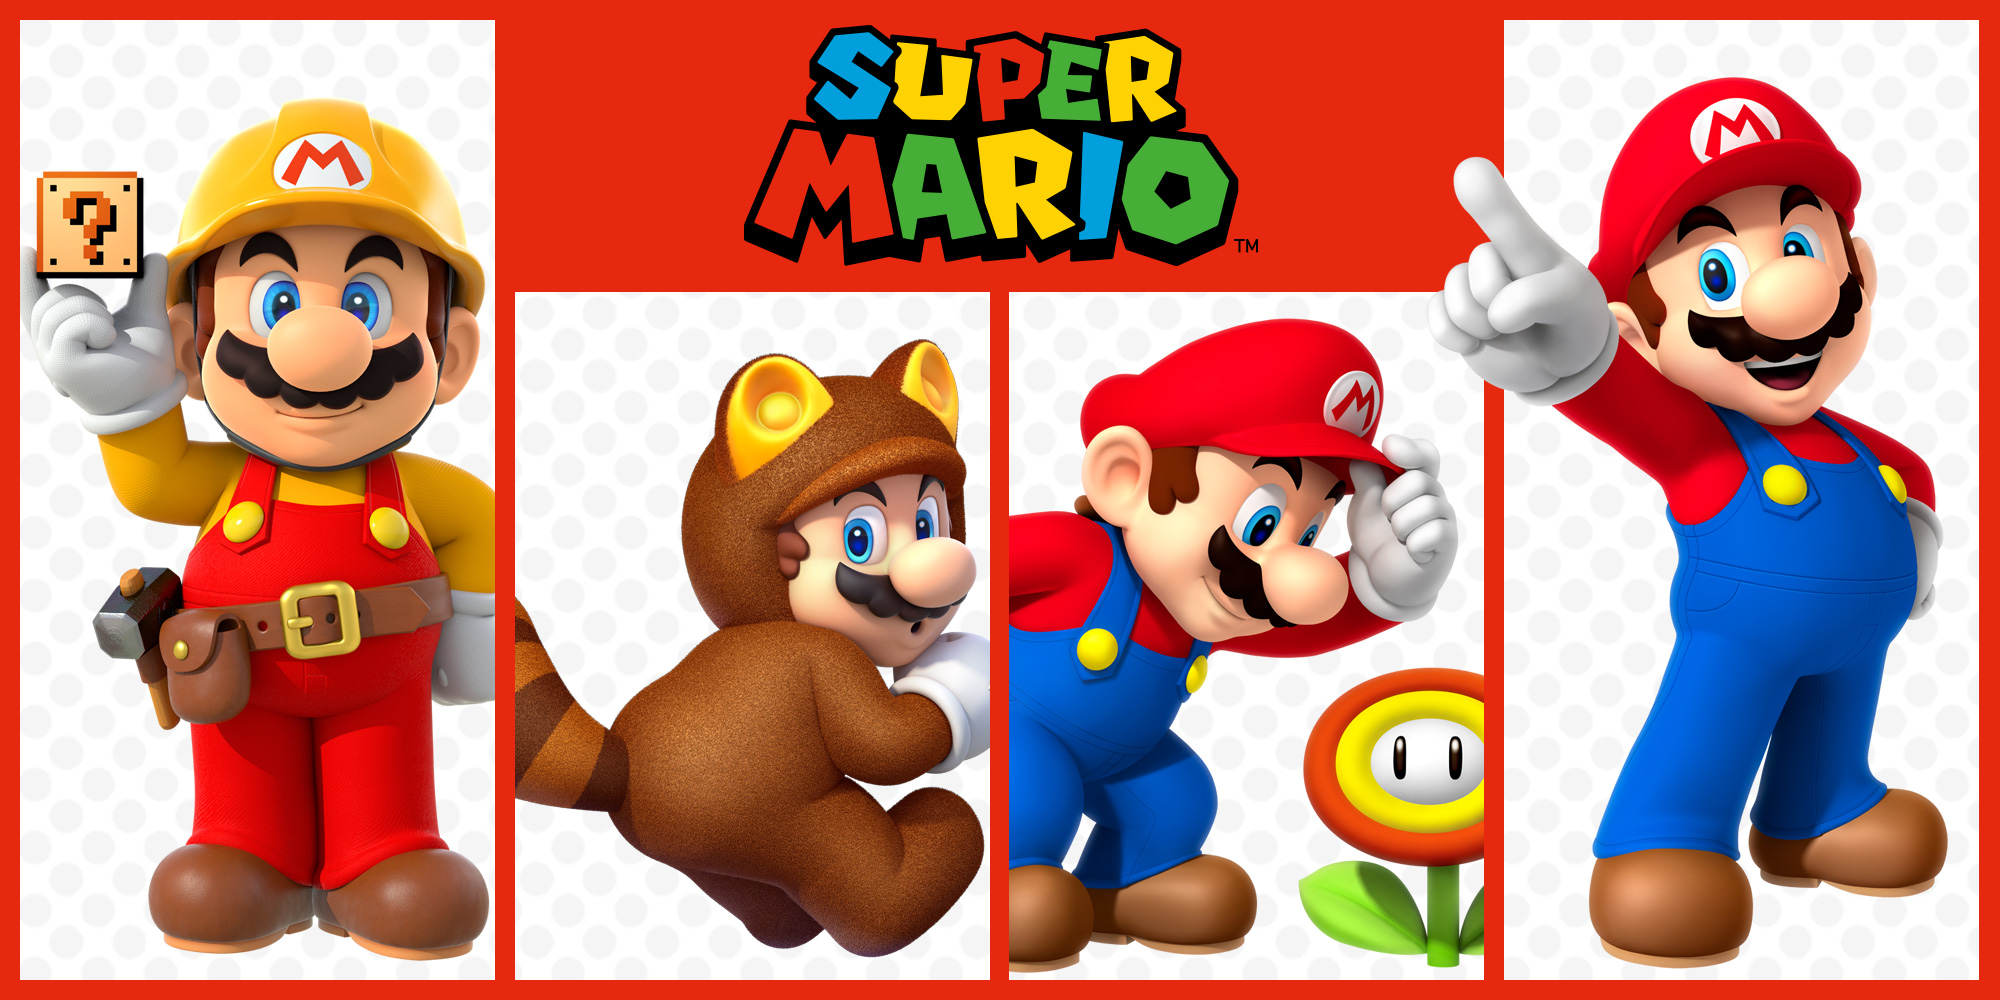 Looking for more Super Mario? These platformers should do the trick!